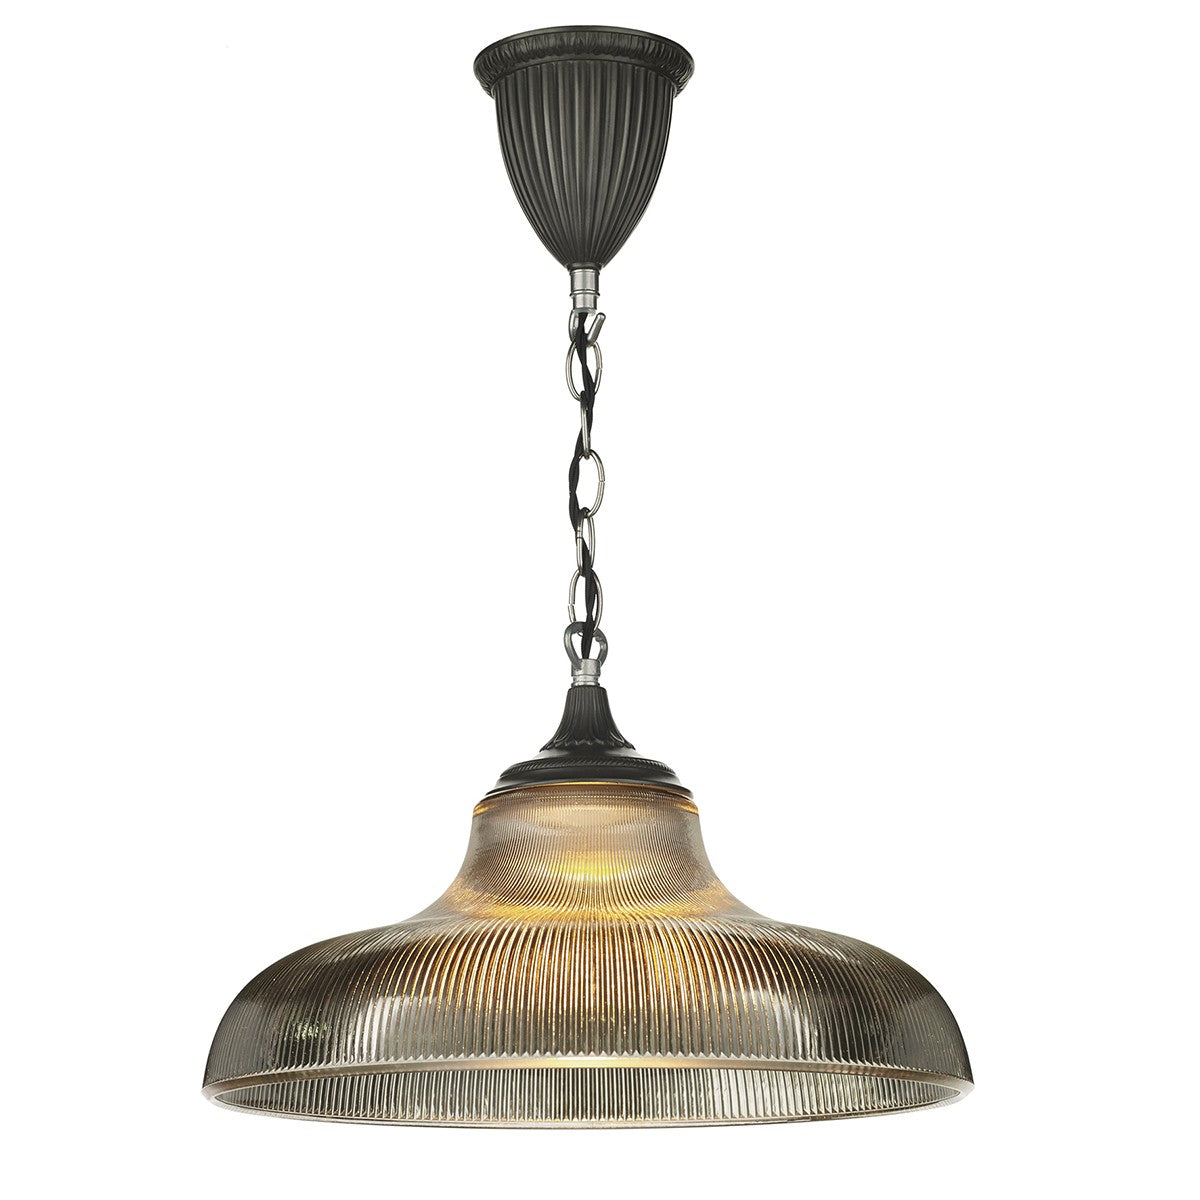 This pendant light has a large ceiling rose with a ribbed detail finished in a dark steel colour, it has a chain hanging down with a shiny steel smokey glass that is circular and ribbed its a thick heavy glass that is shallow and wide so you will see the bulb pointing out underneath.